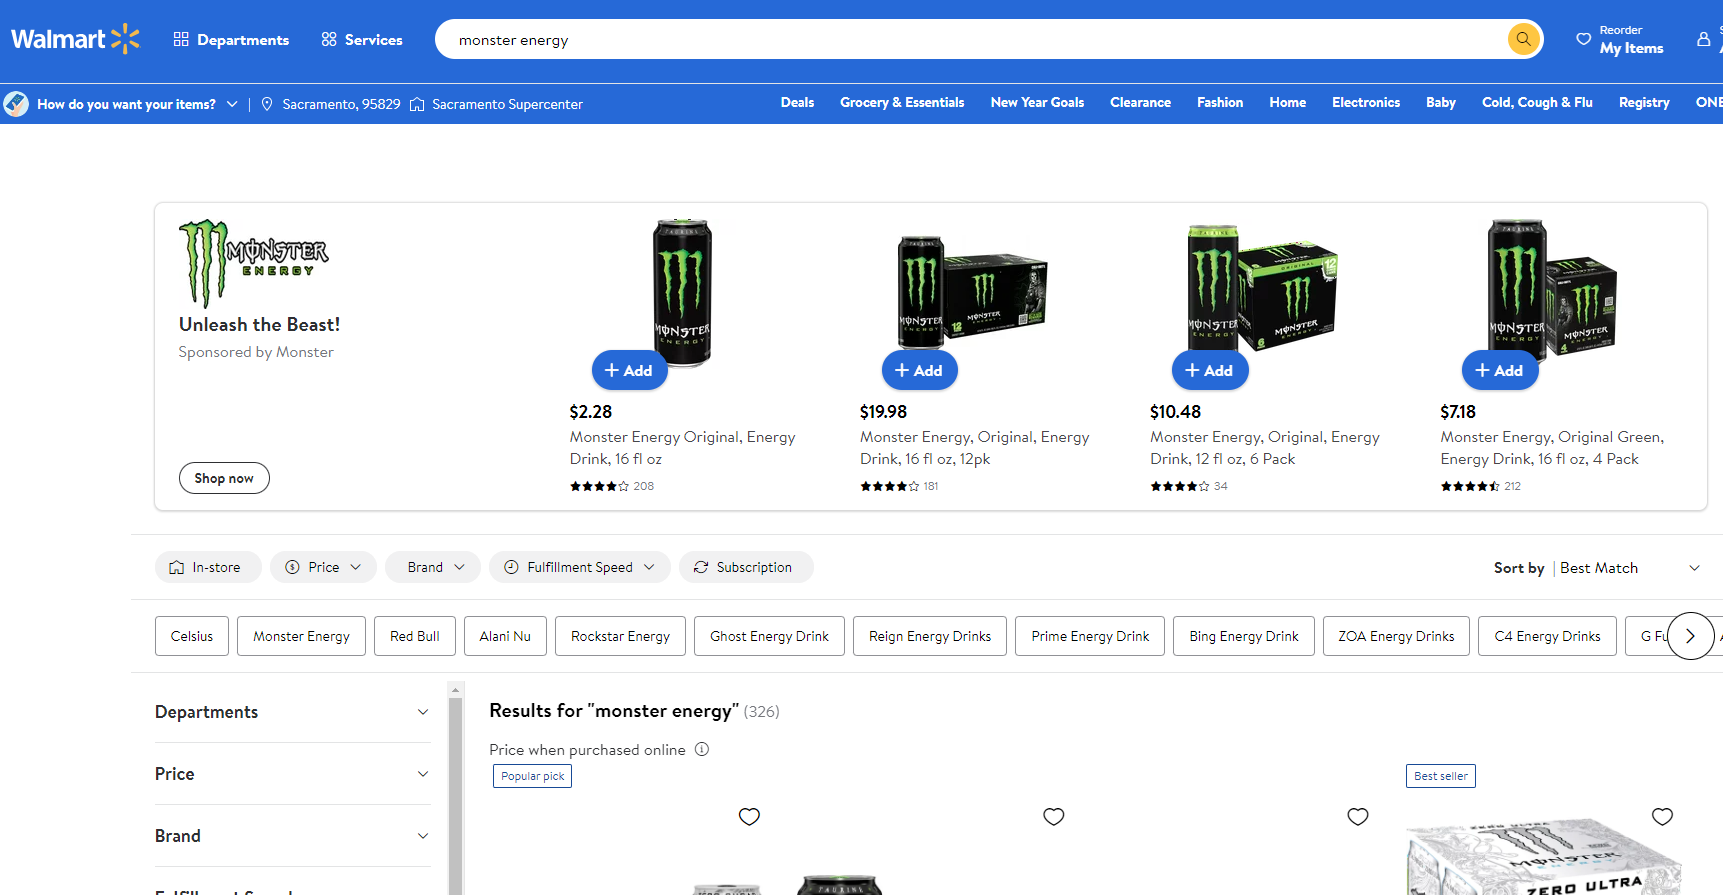 Search engine results for Monster Energy on Walmart.